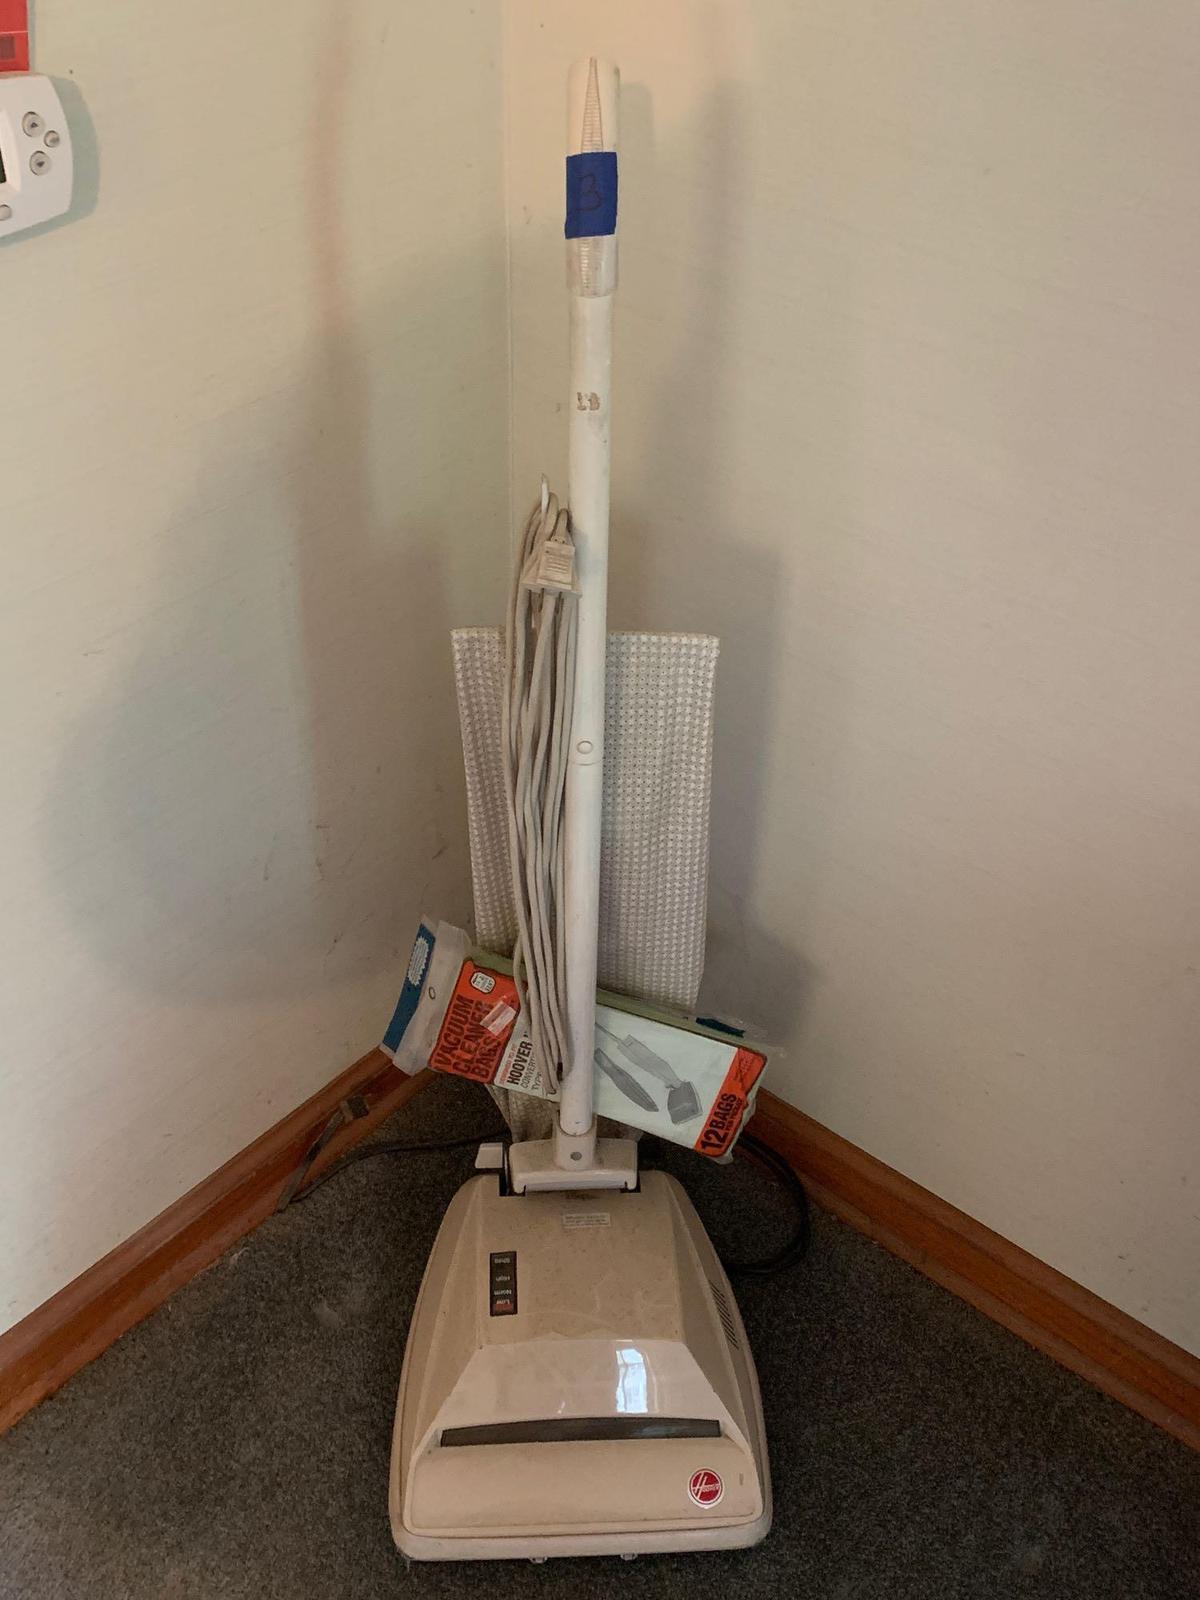 Hoover vacuum with extra bags